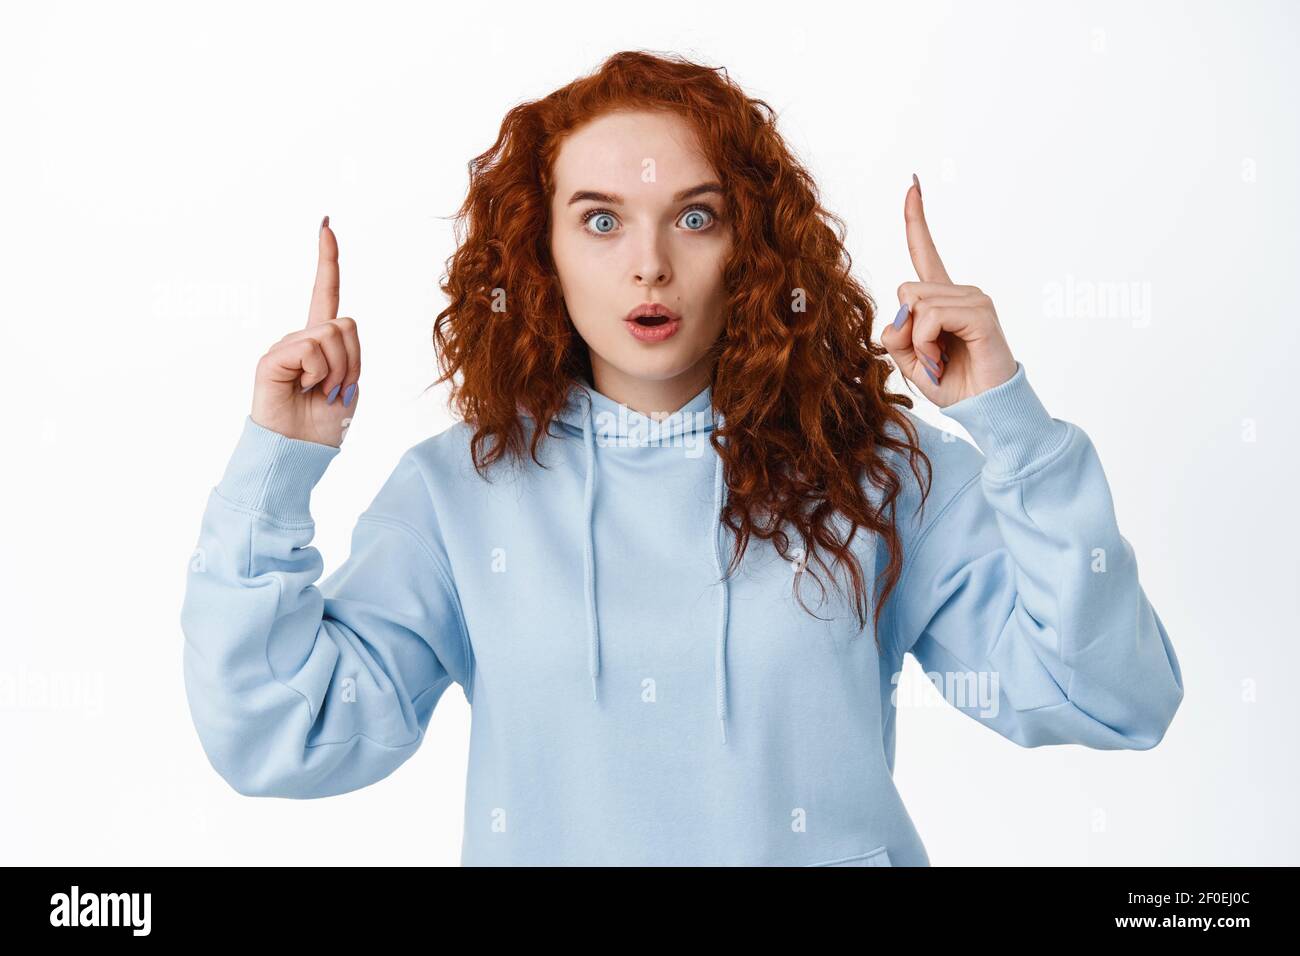 Impressed redhead girl stare at camera surprised and gasping, pointing fingers up at super cool thing, standing against white background in casual Stock Photo